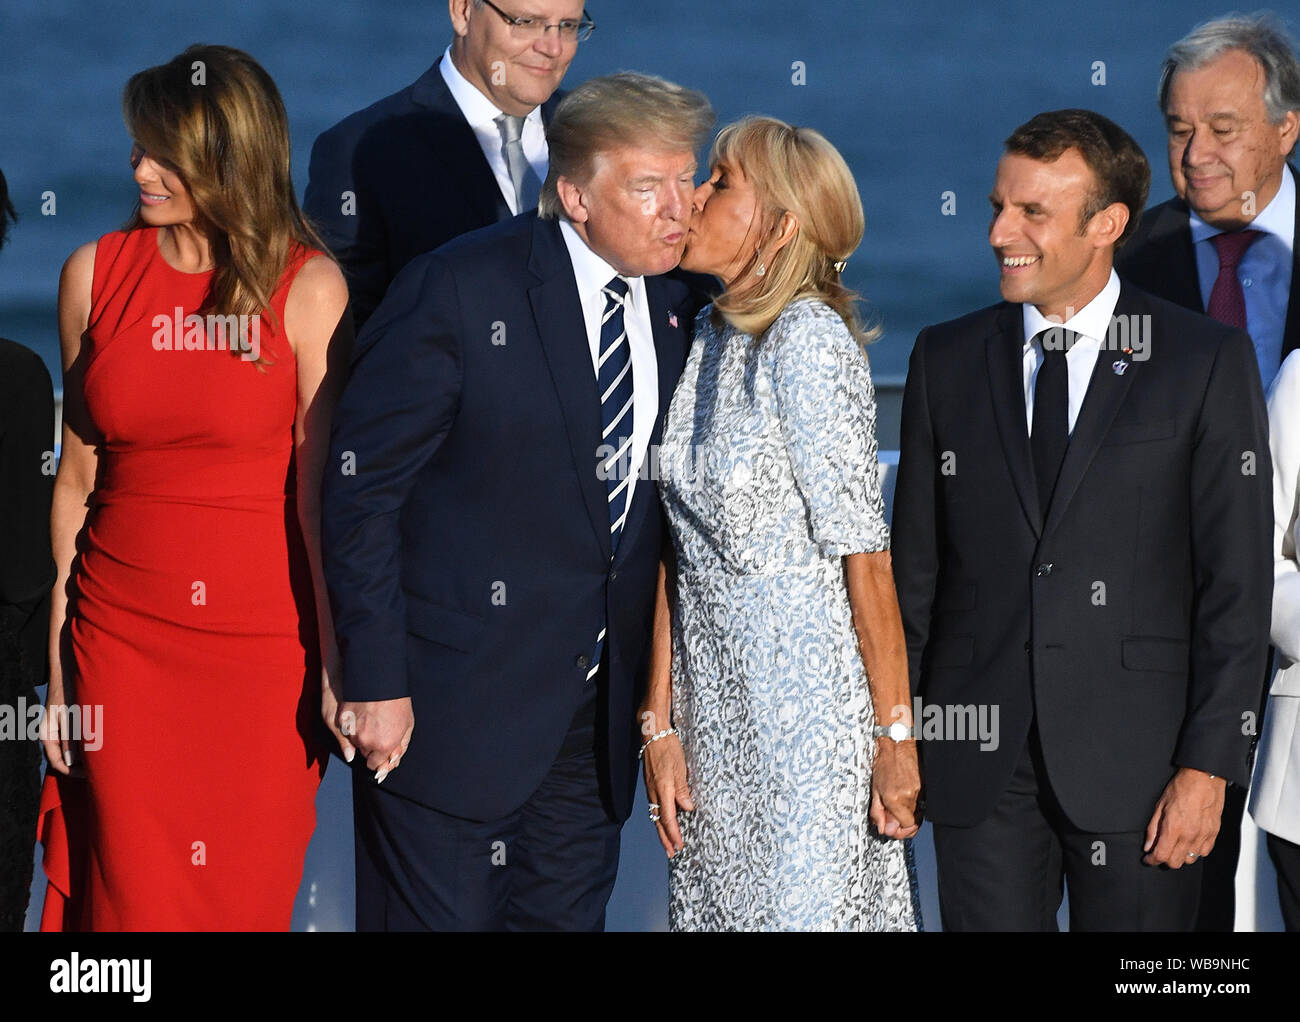 French President Emmanuel Macron watches as his wife Brigitte Macron kisses  President Donald Trump as he stands with first lady Melania Trump as they  join other World Leaders for the family photo